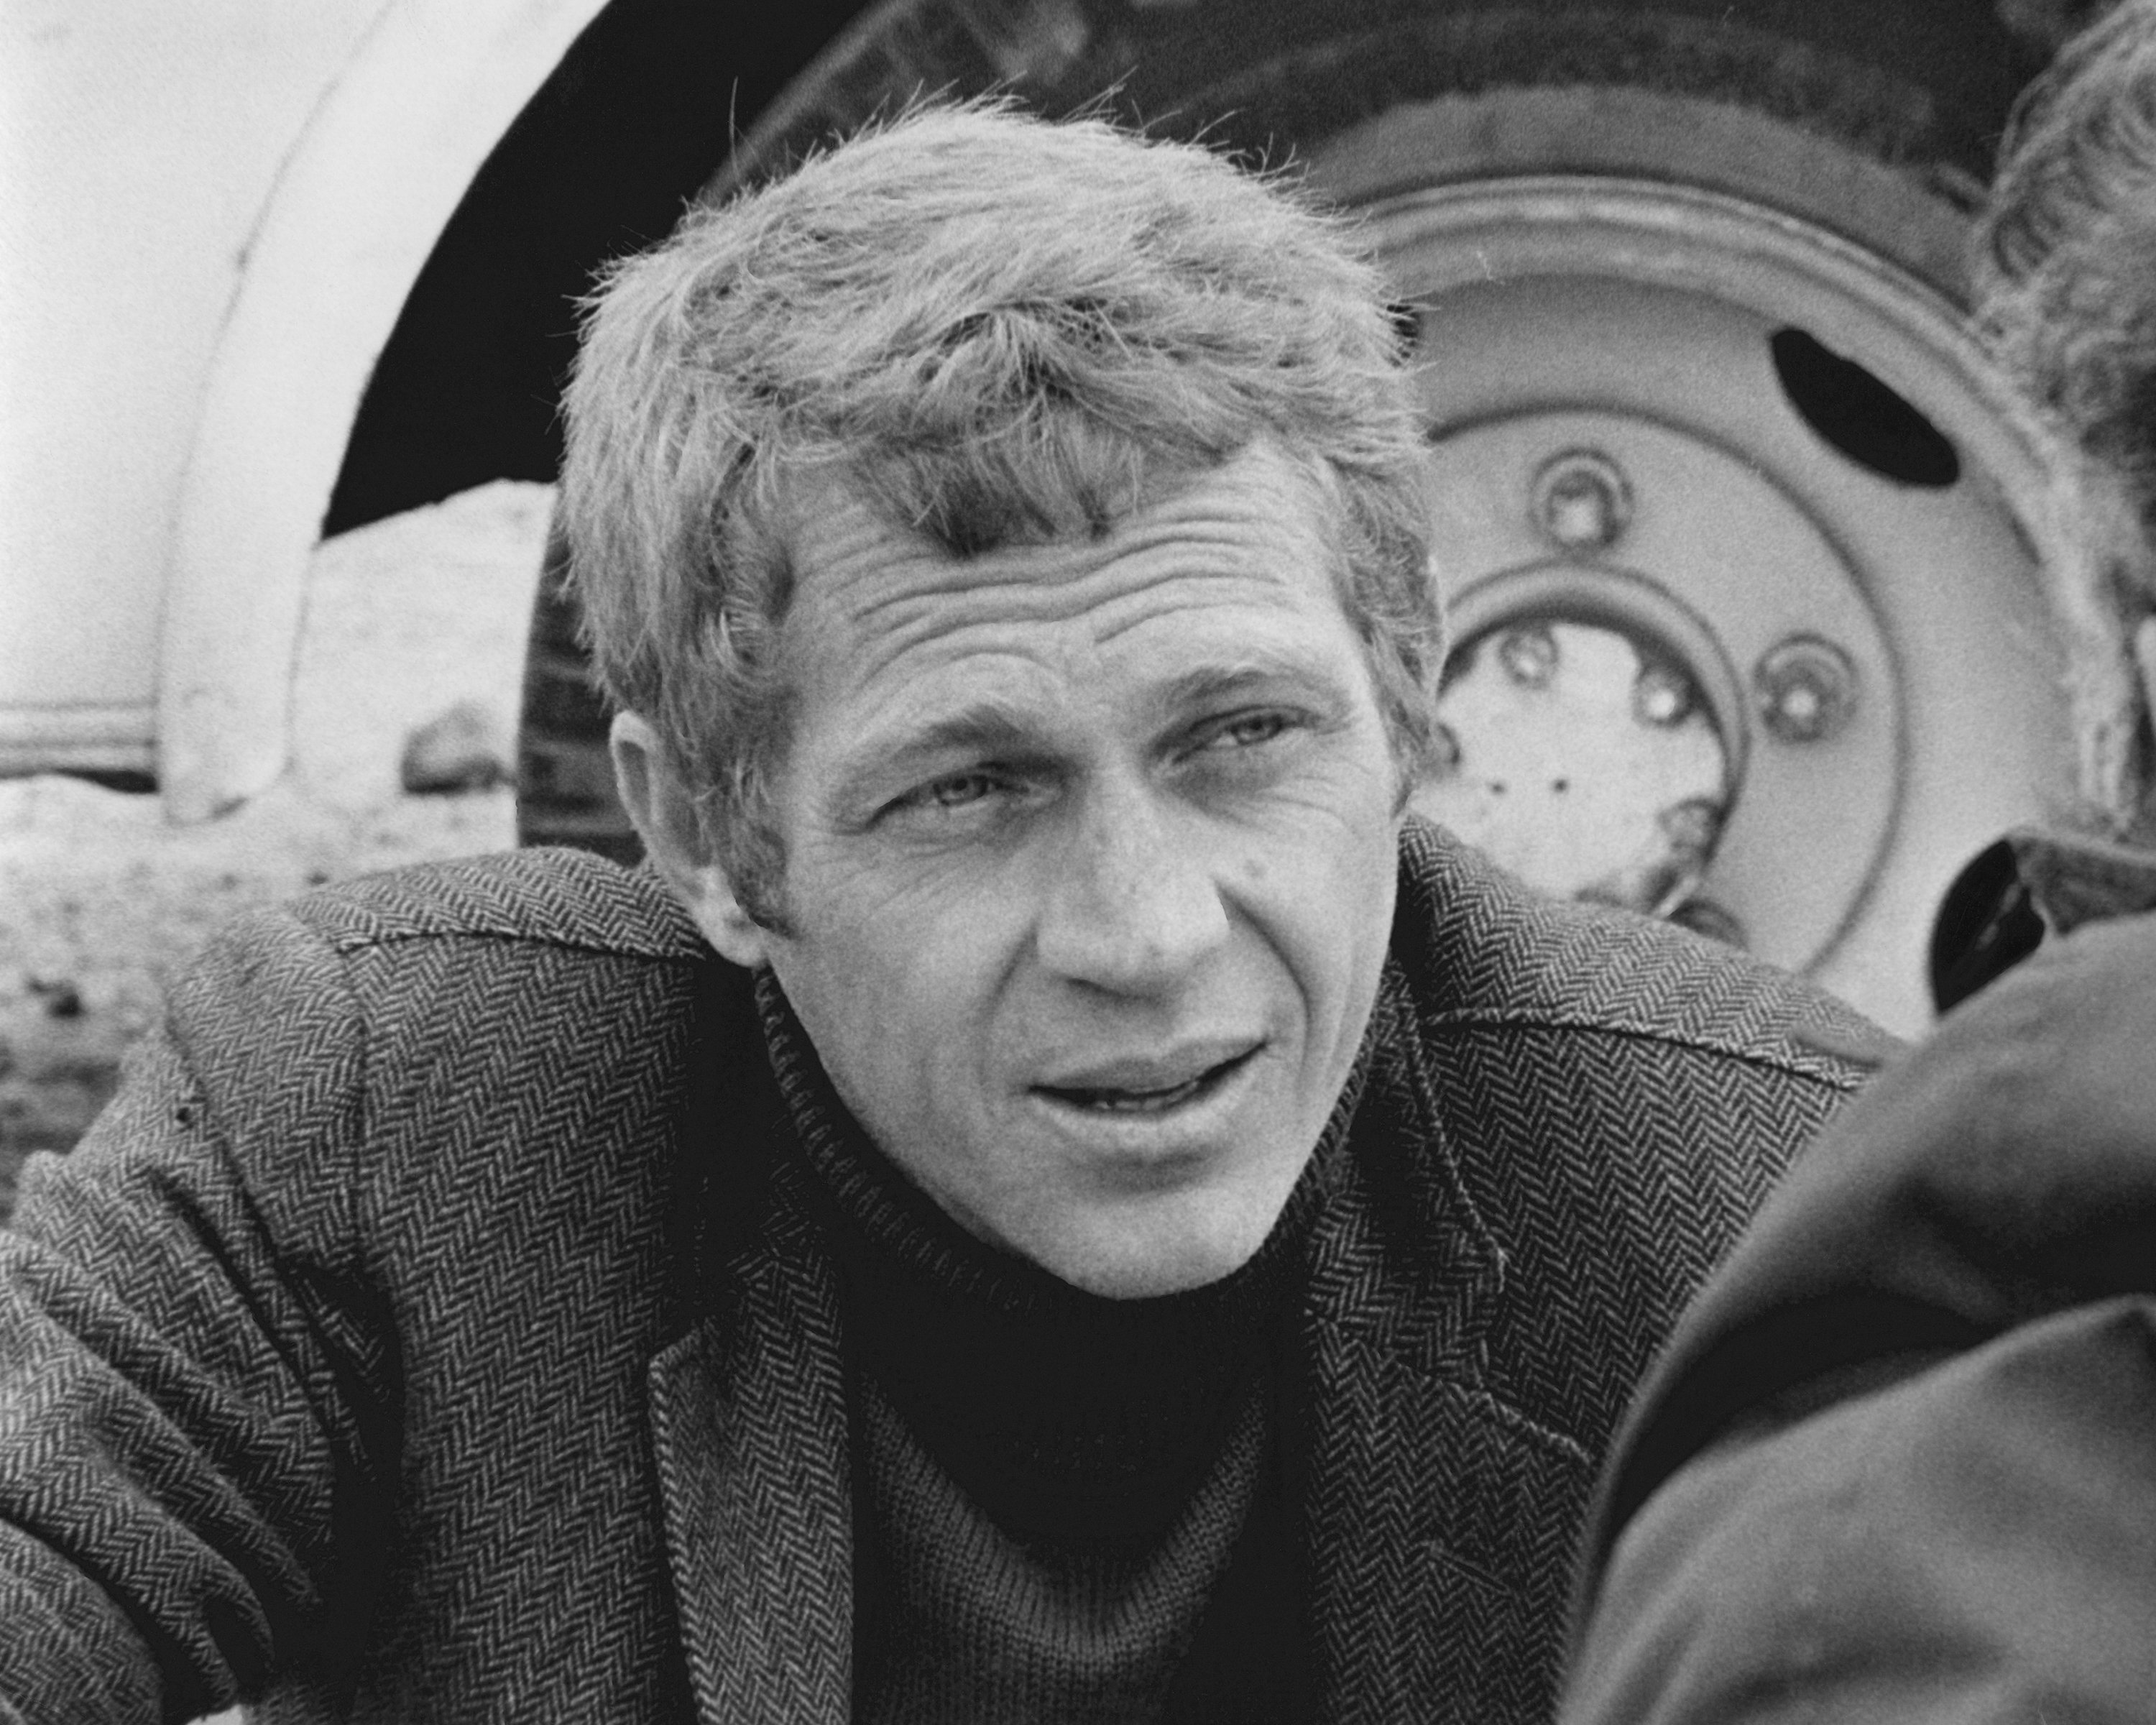 Steve McQueen in California 1968. | Source: Getty Images